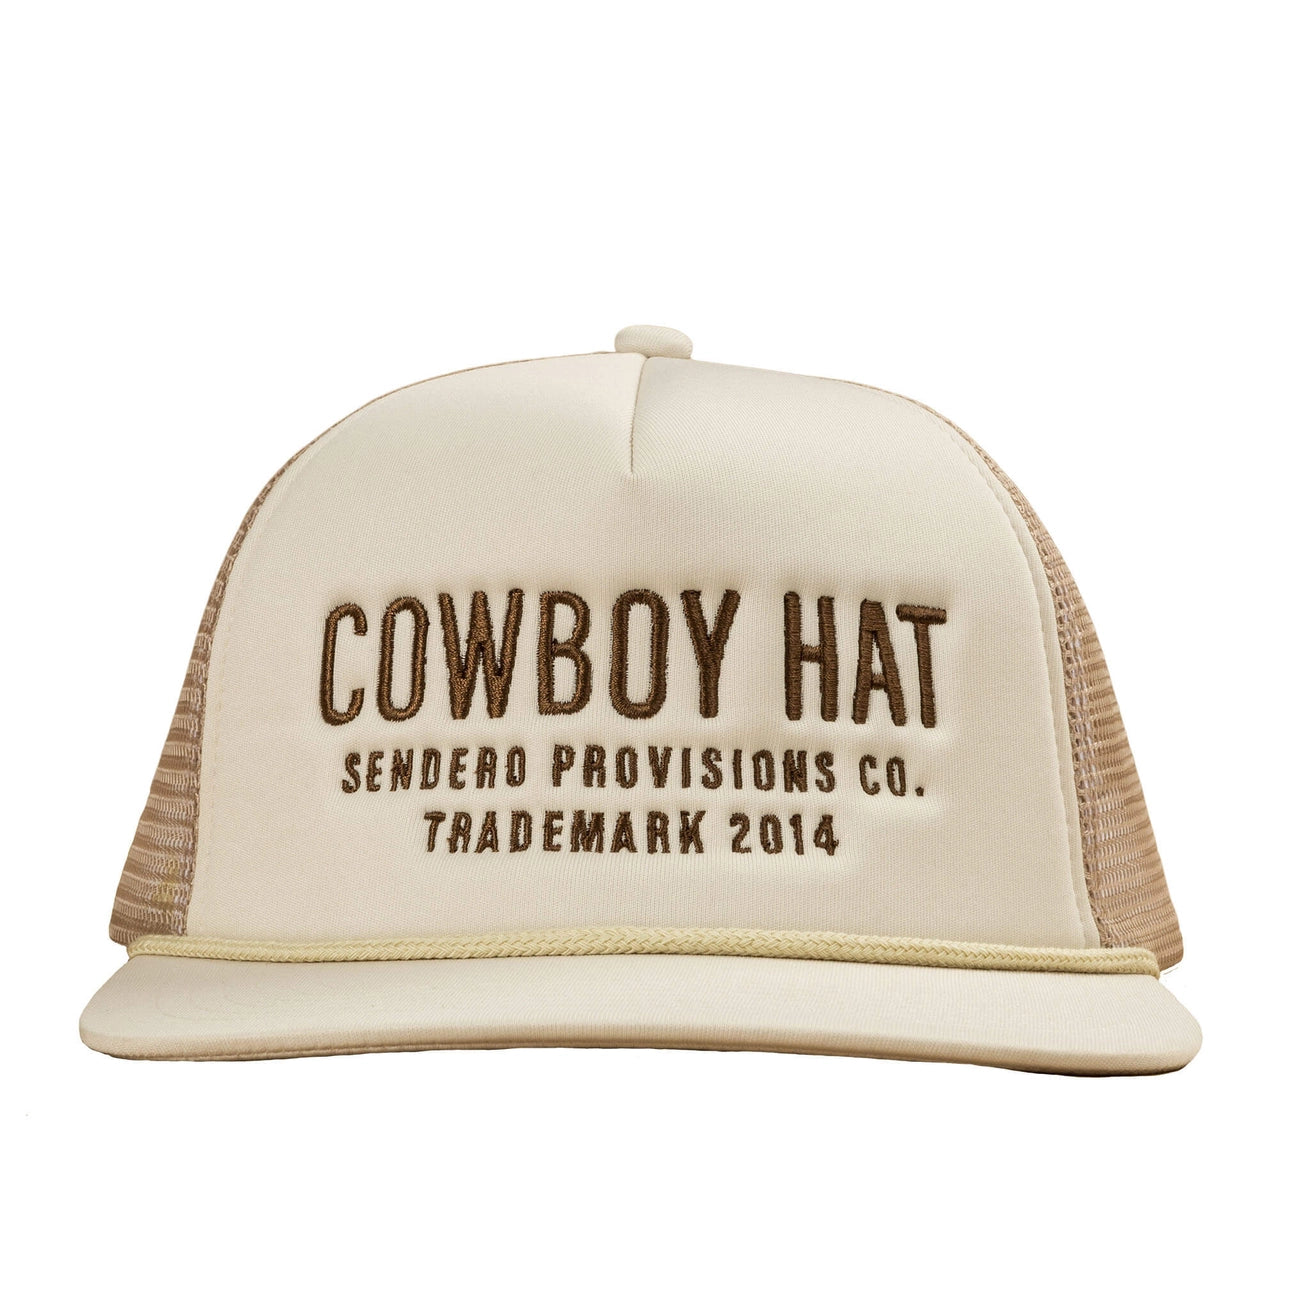 The Hell Yeah Trucker is back! Now available on a brown/tan mesh